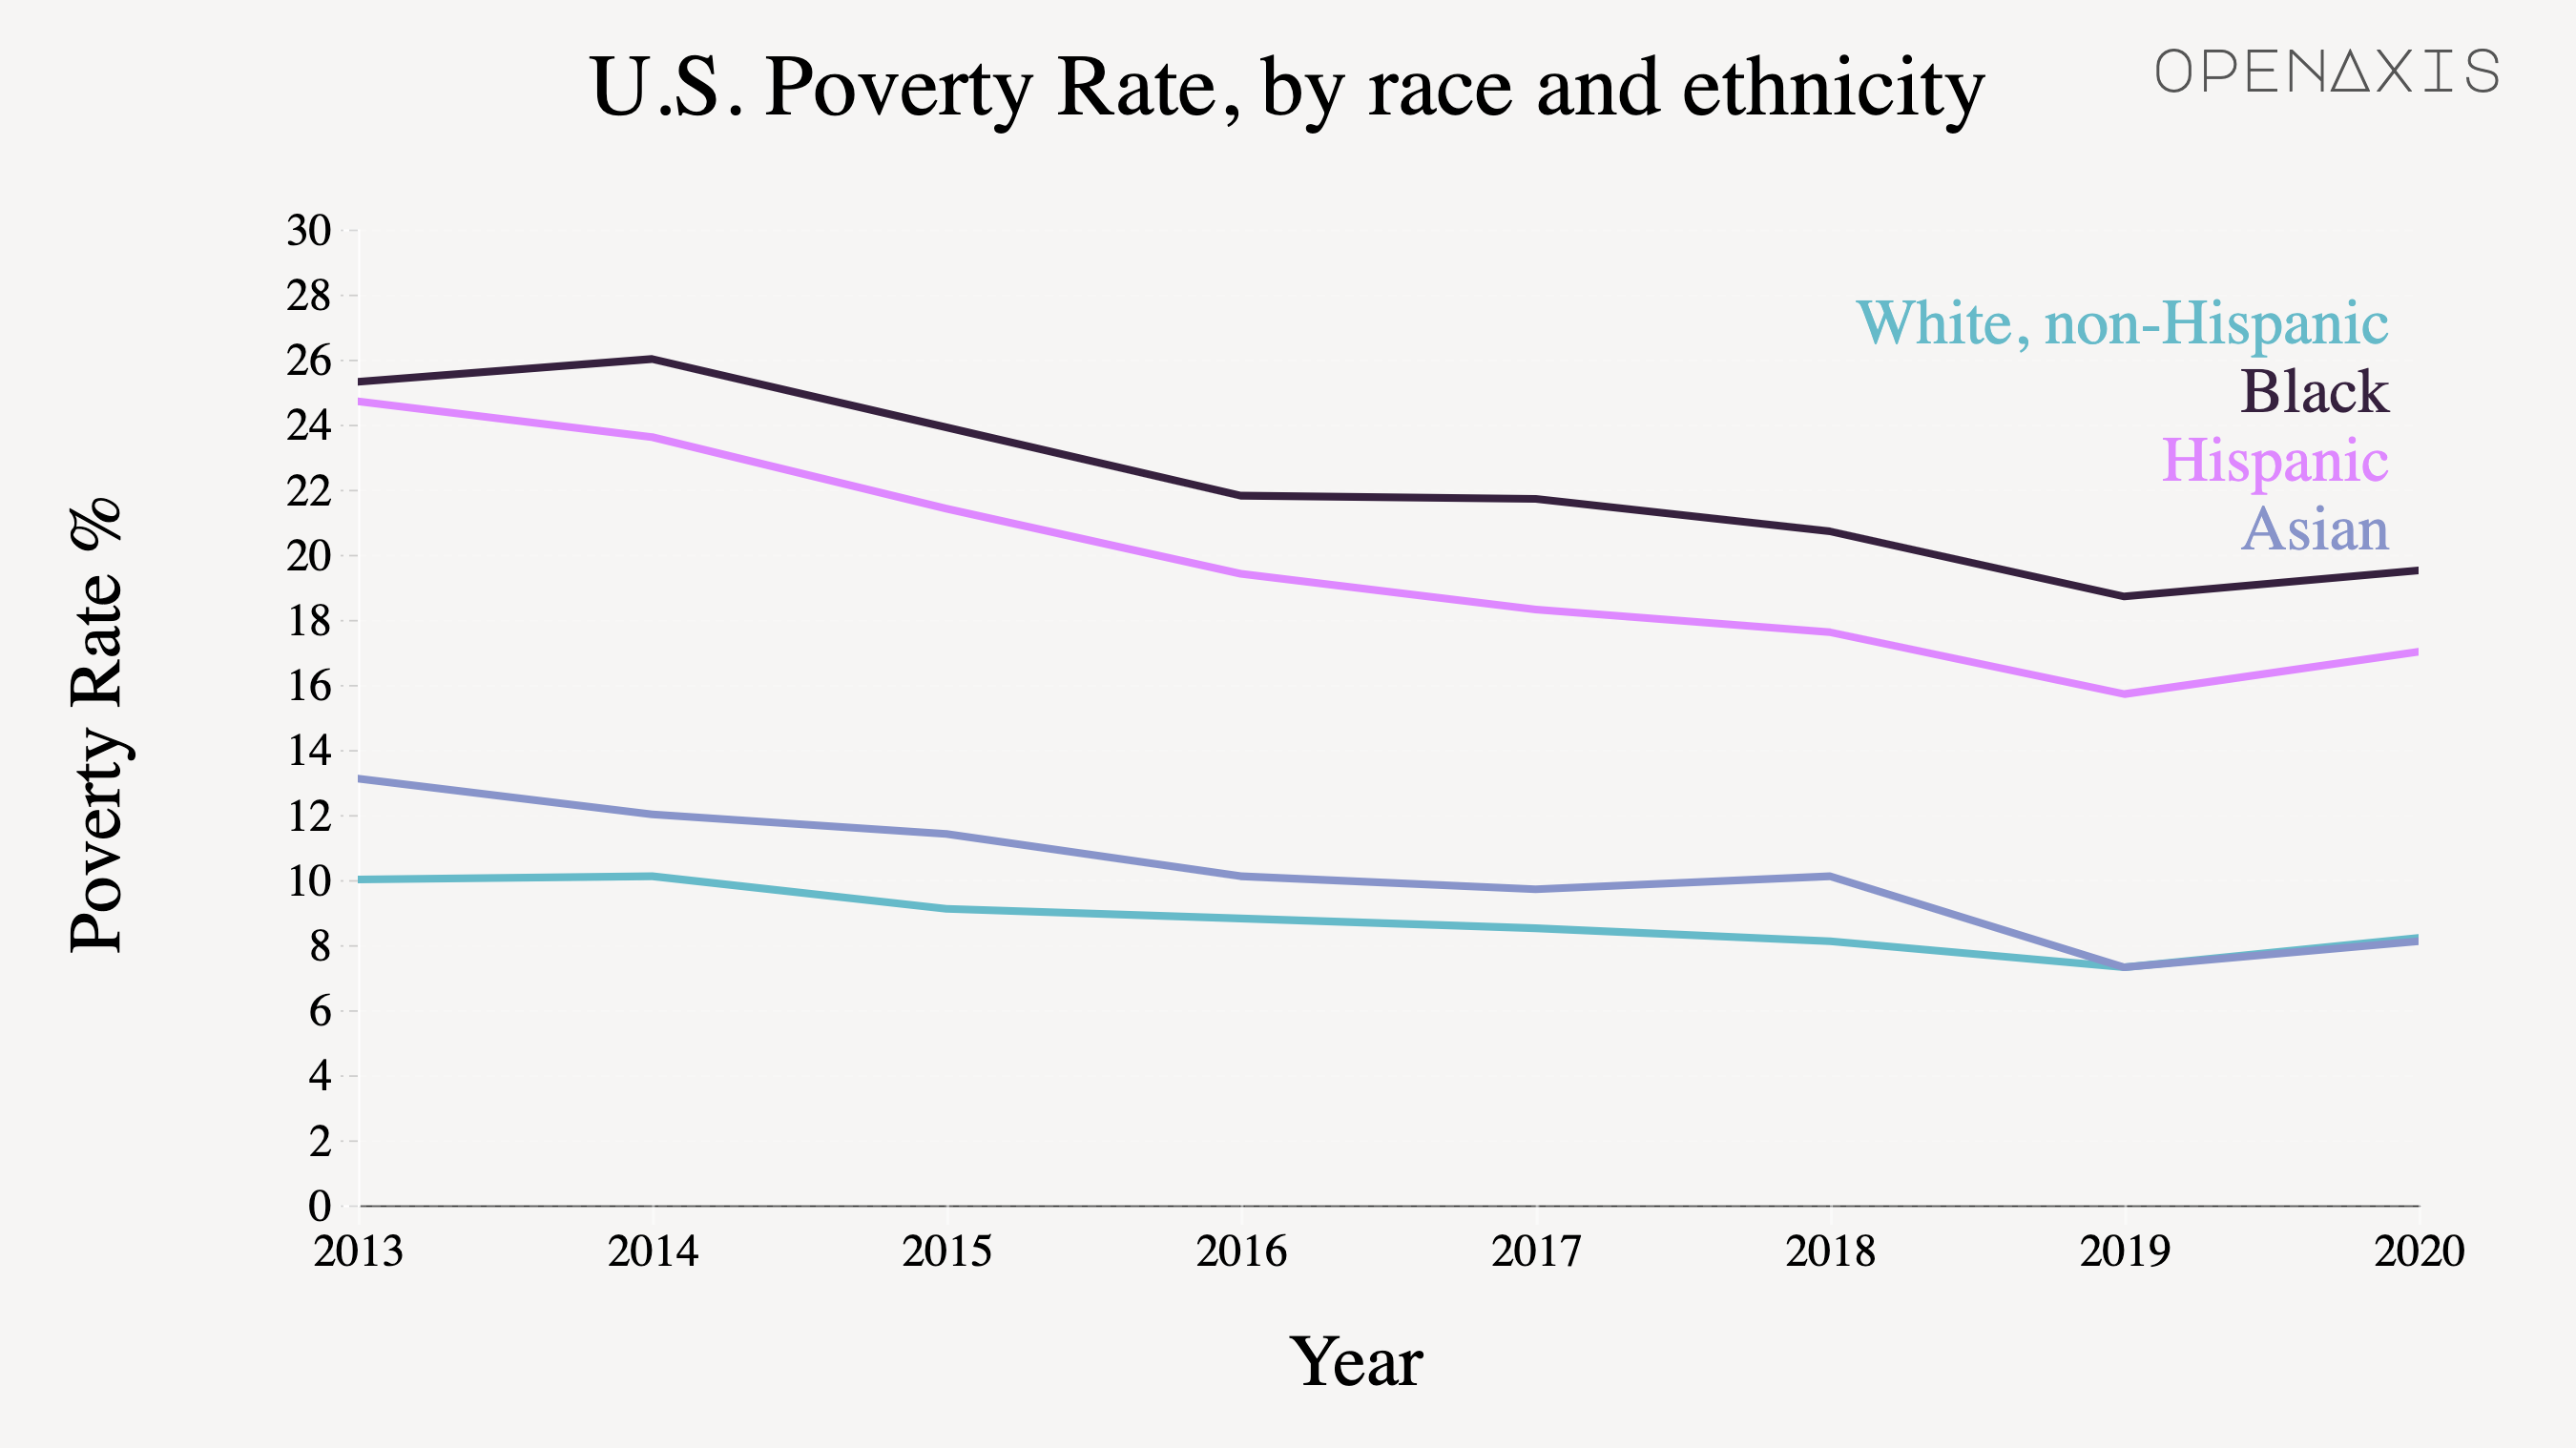 "U.S. Poverty Rate, by race and ethnicity"